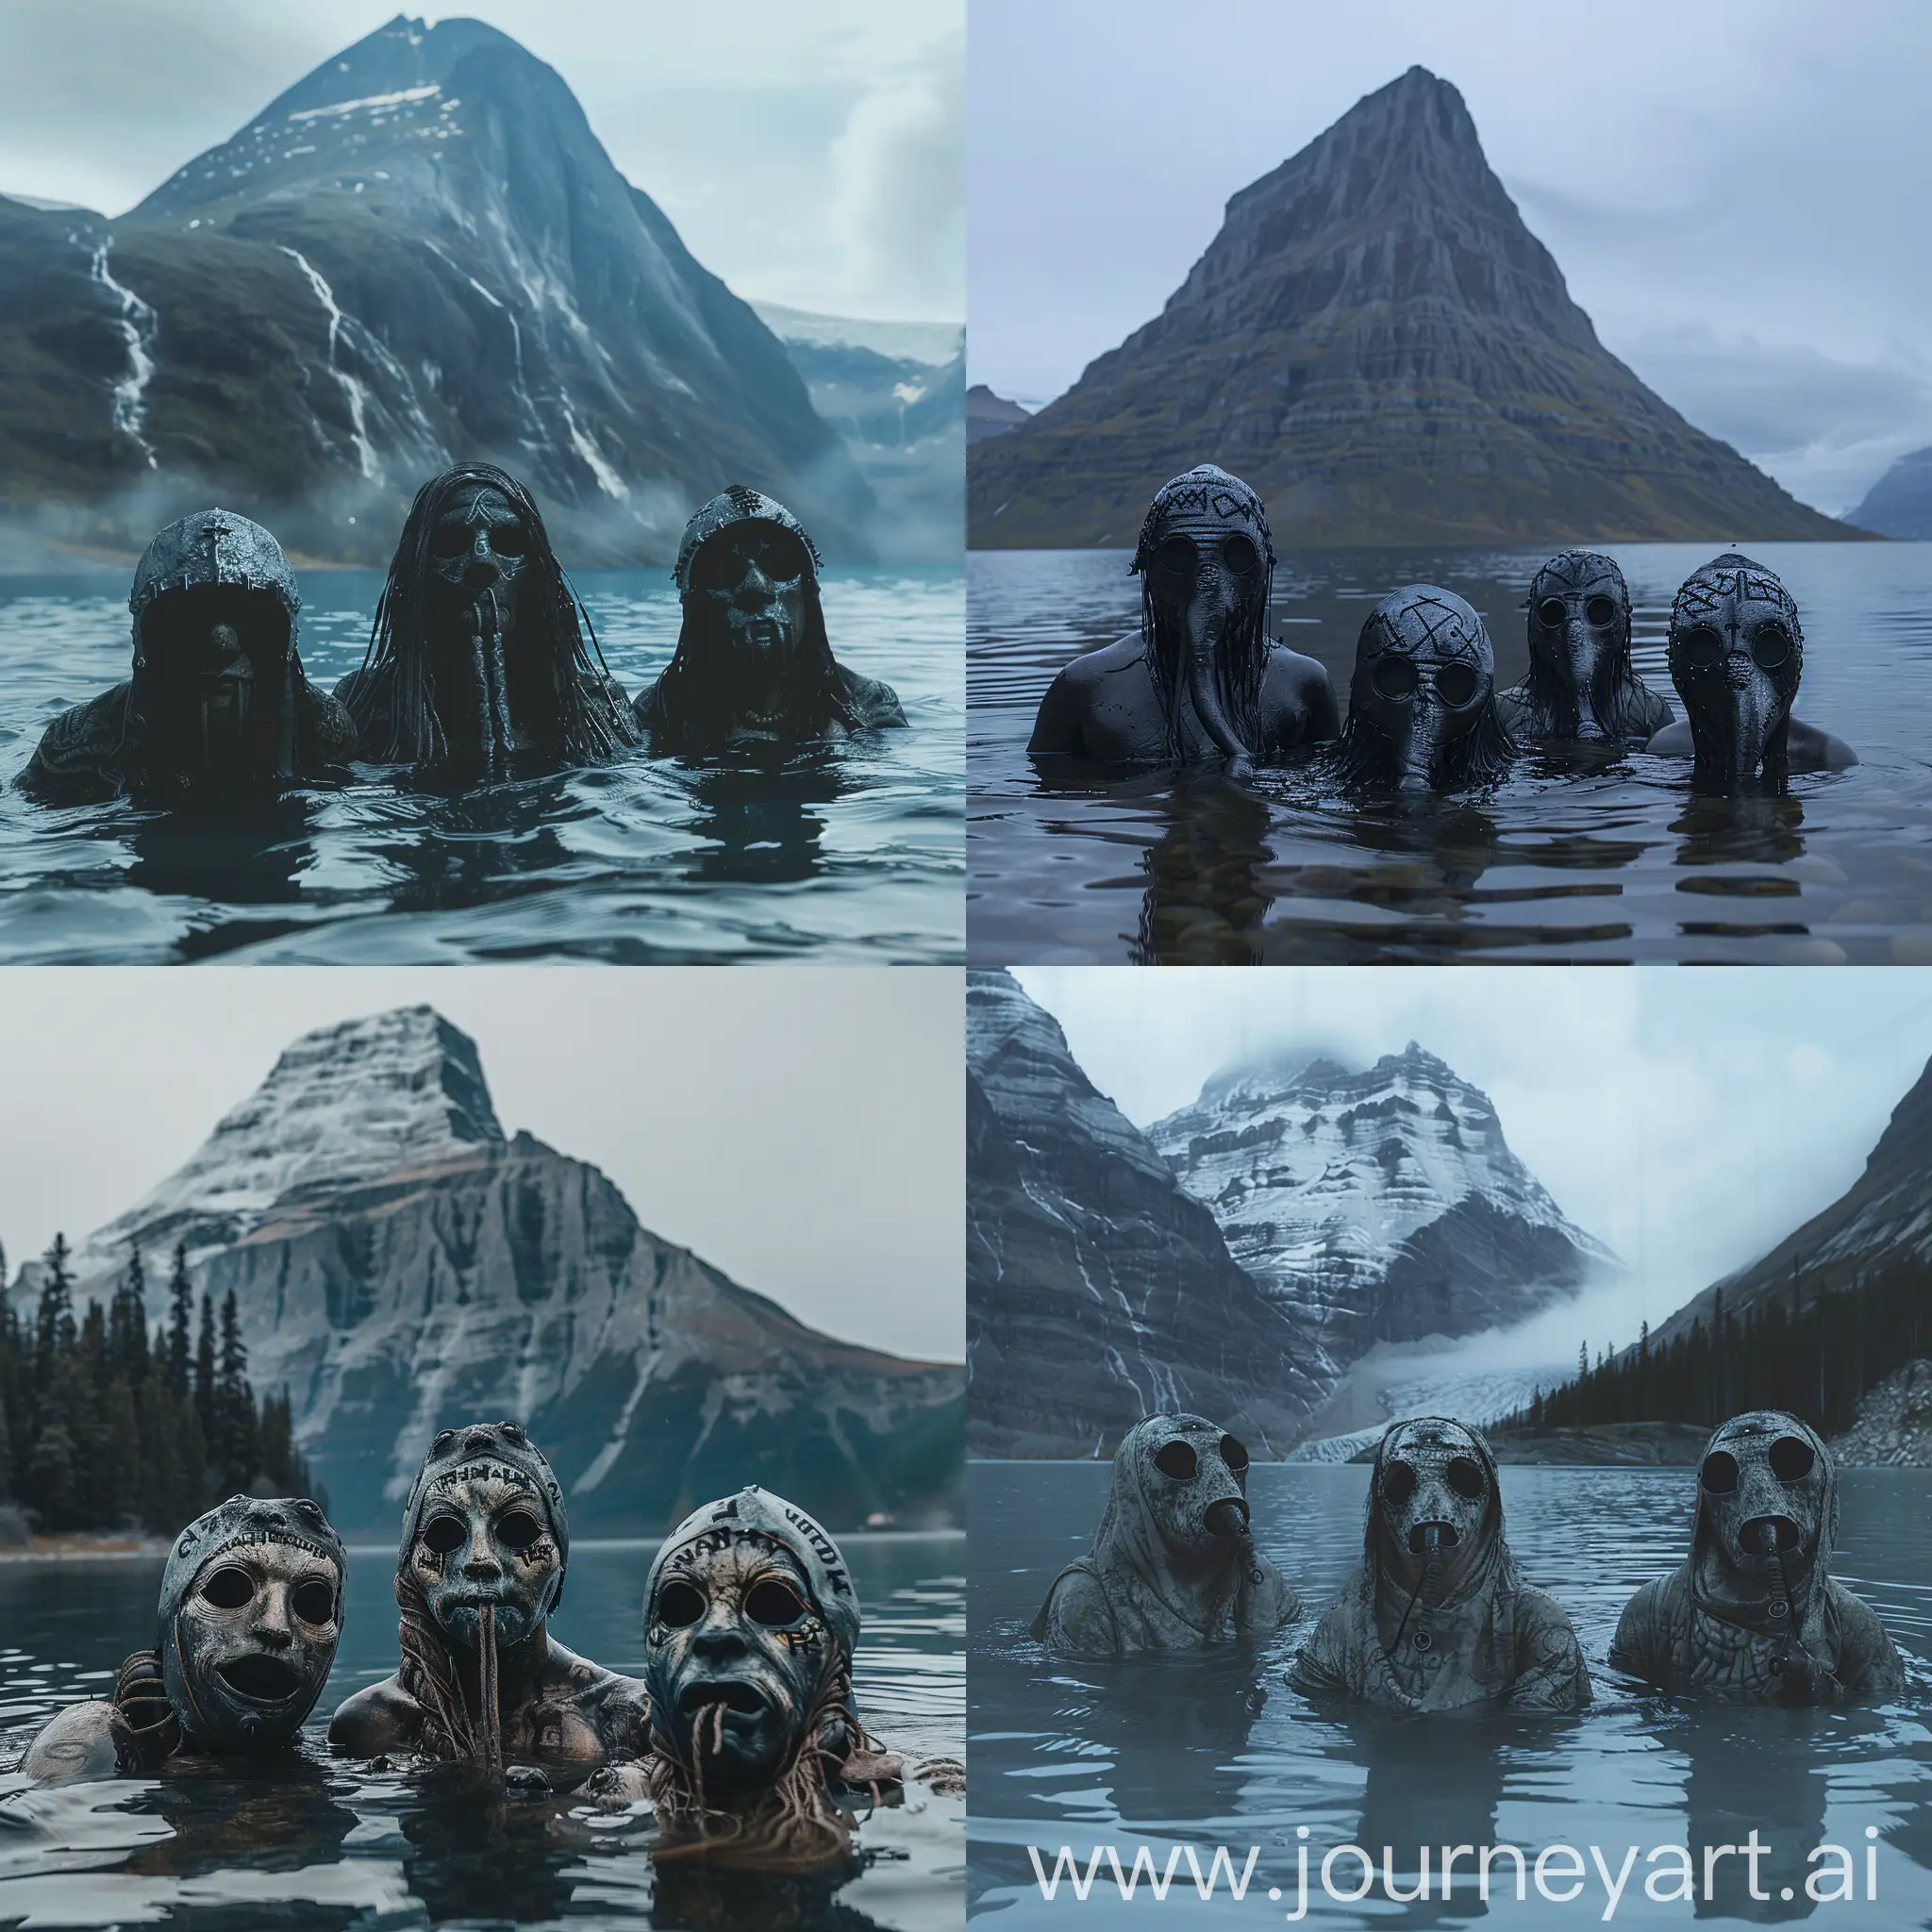 three people in a body of water with a mountain in the background, black hollow eyes, runic words, tiktok video, inuit heritage, old humanoid ents, wlup, watermark:-1, gaping gills and baleen, meme, finnish naturalism, the masks come off at night, frontpage, aliased, high qulity, peoples